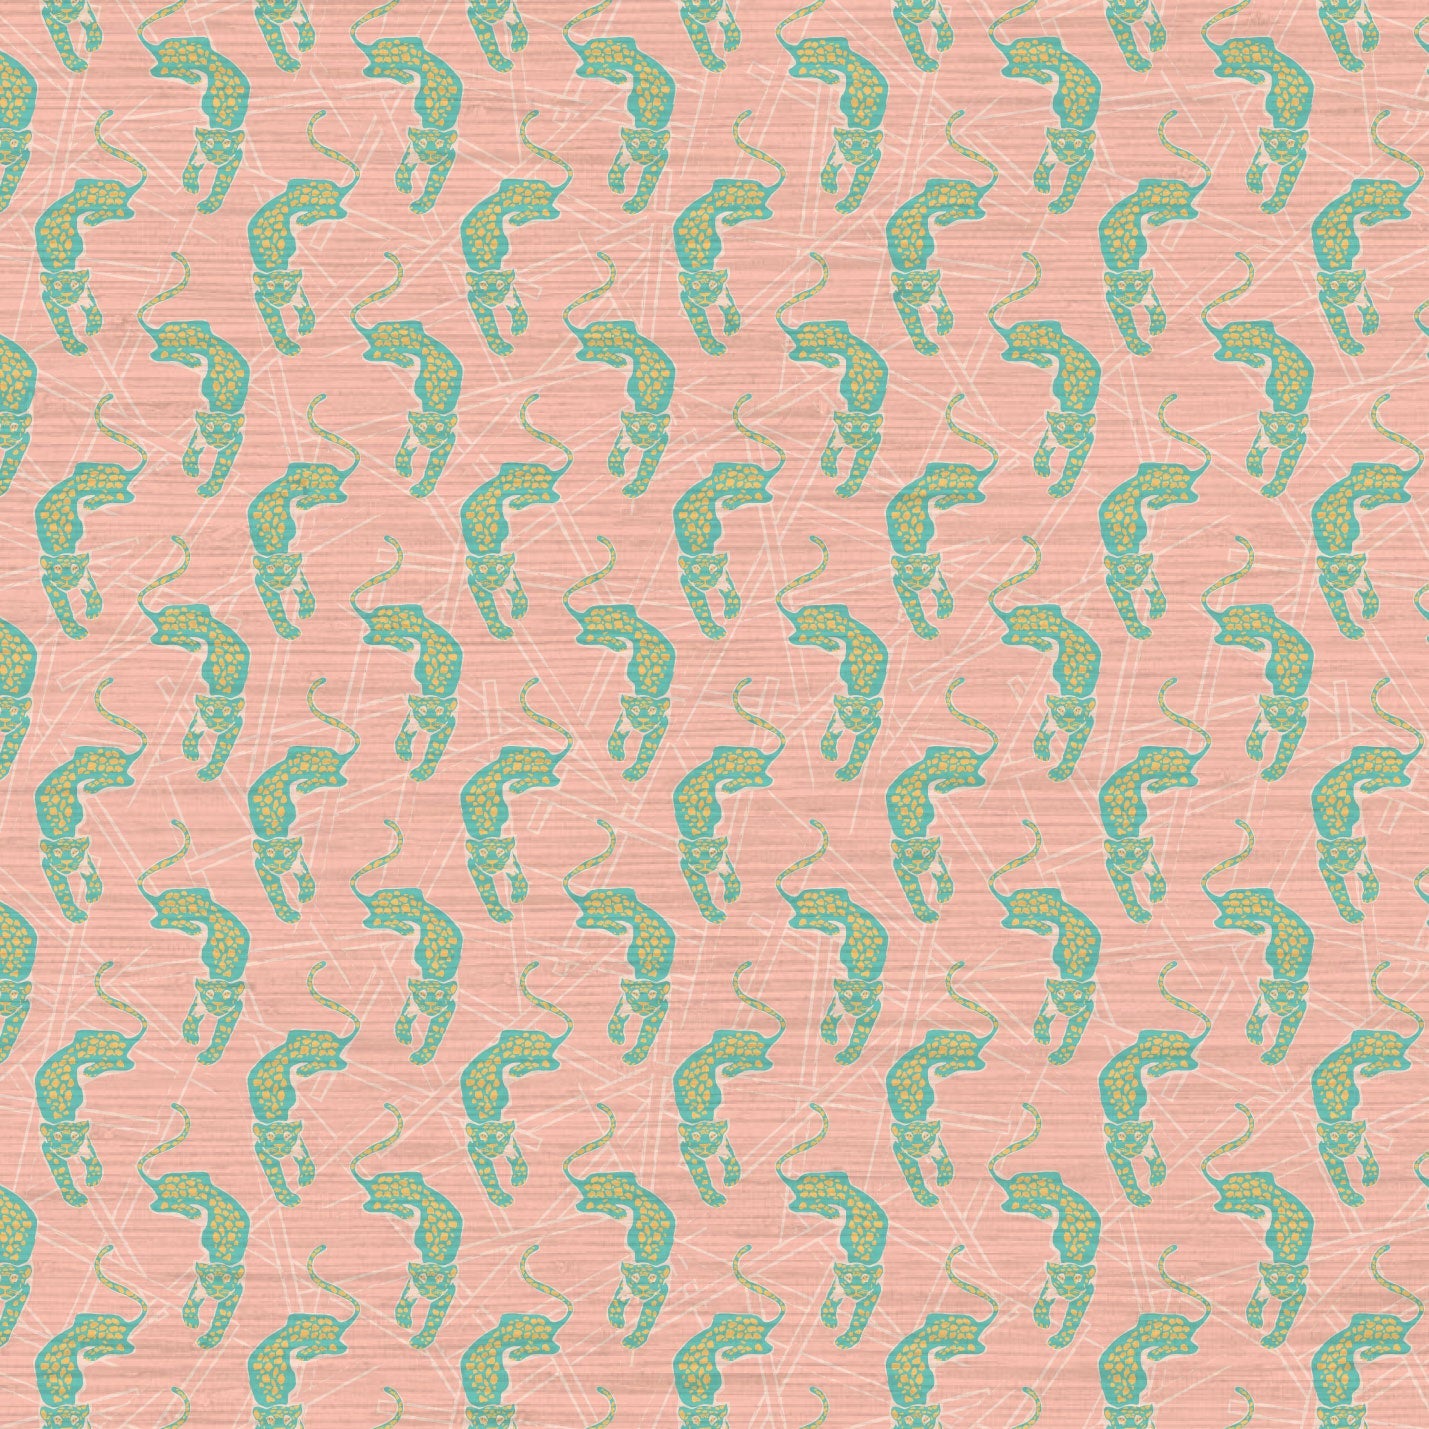 Grasscloth wallpaper Natural Textured Eco-Friendly Non-toxic High-quality  Sustainable Interior Design Bold Custom Tailor-made Retro chic Grand millennial Maximalism  Traditional Dopamine decor tropical jungle garden vacation animal cheetah mint green coral pink pastel neon